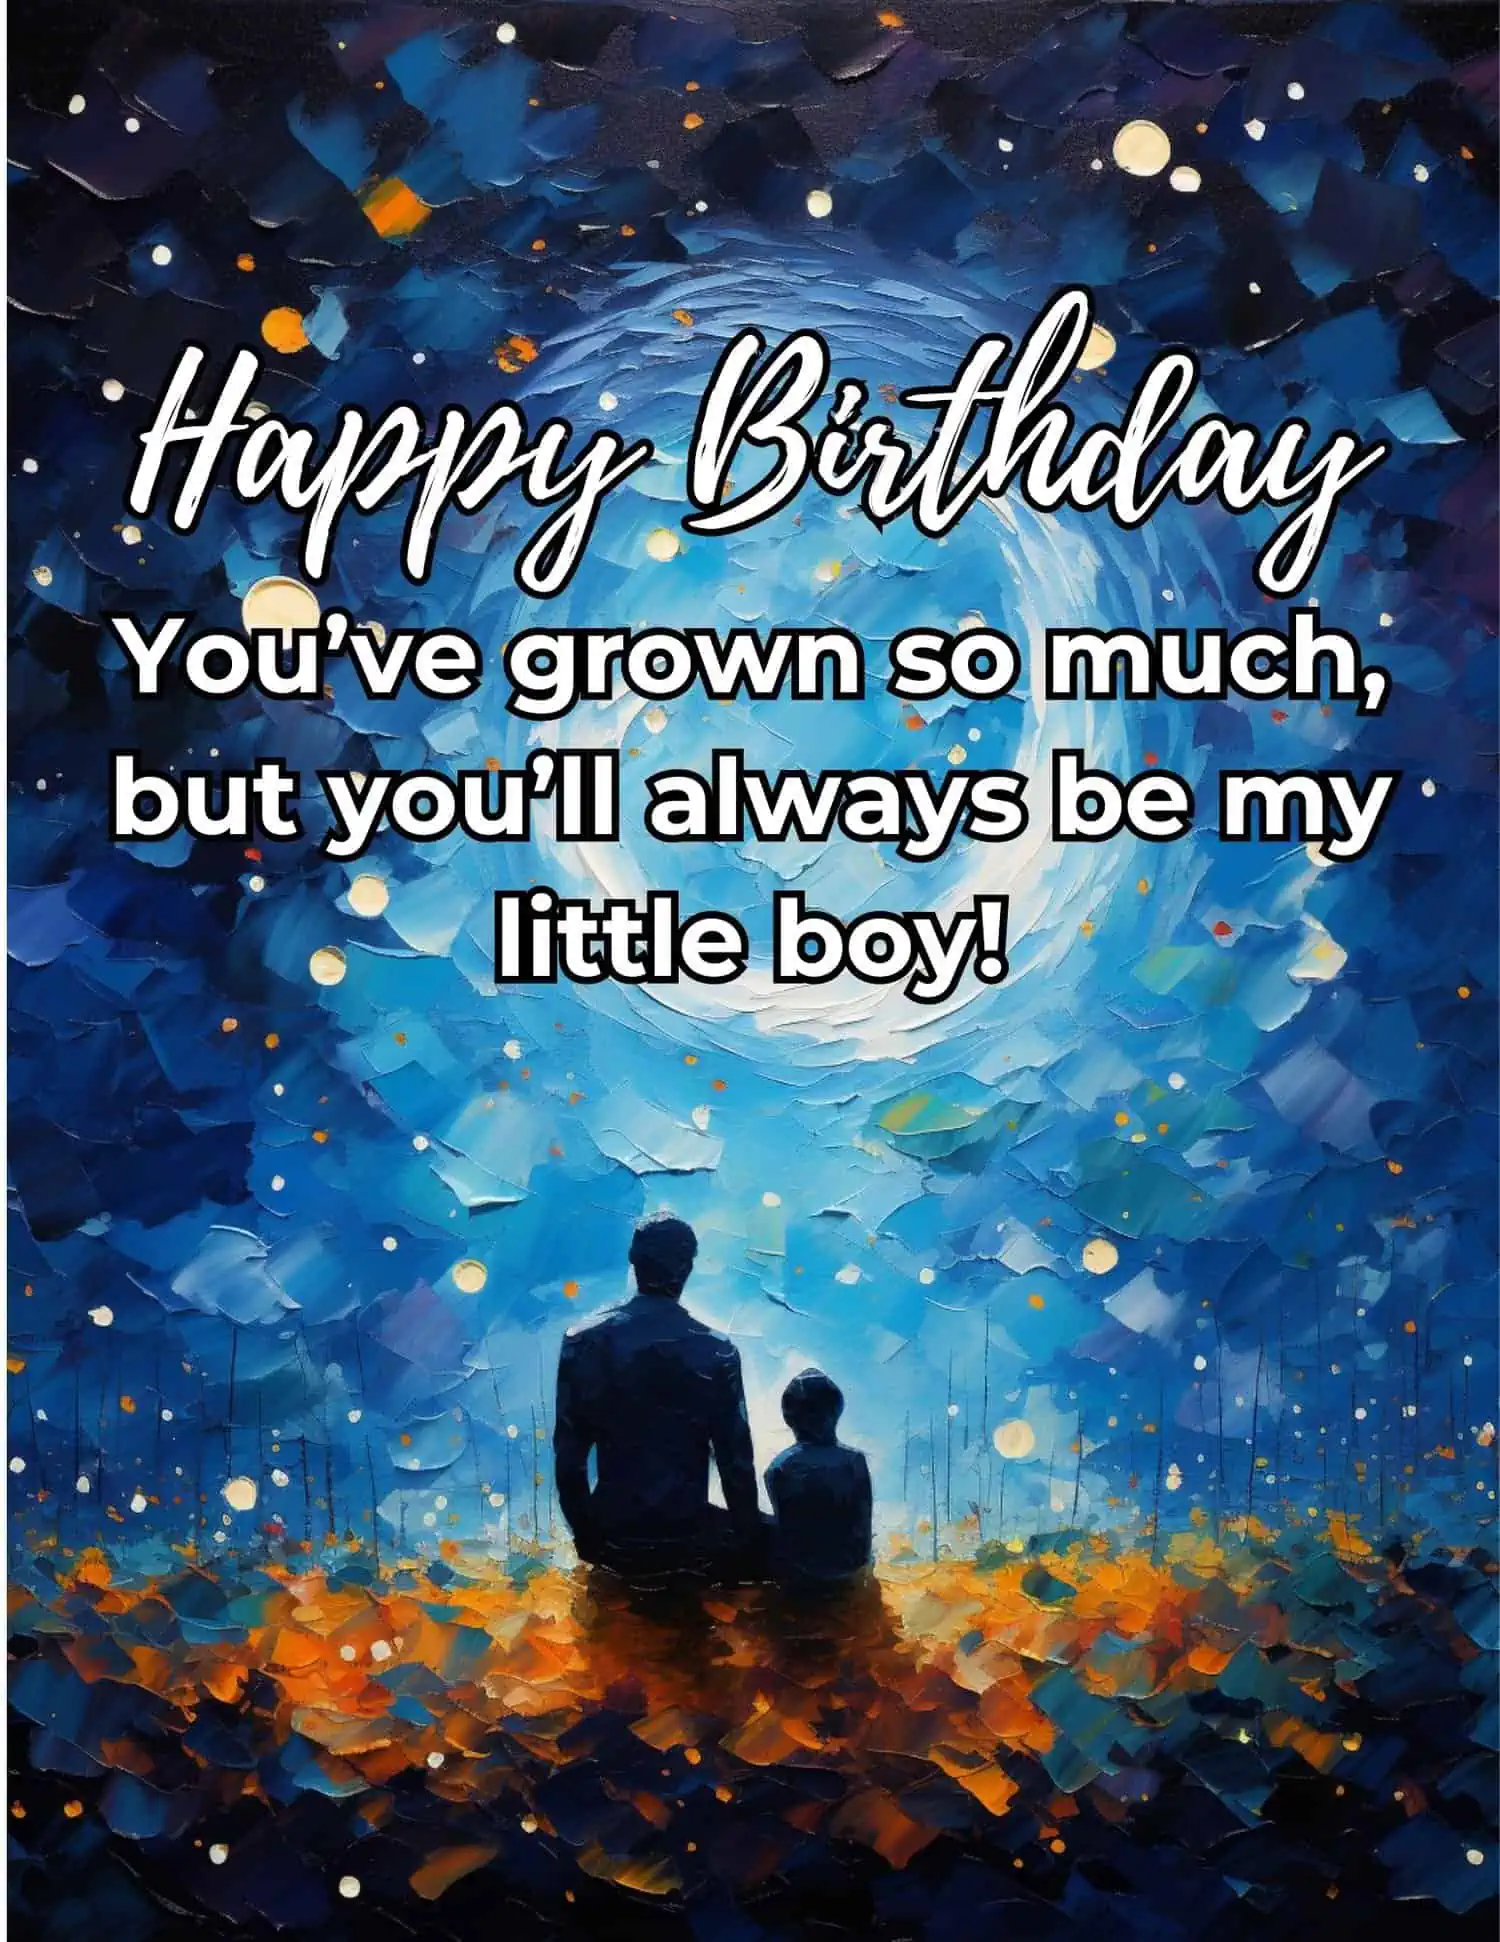 A collection of heartfelt wishes for your son's birthday.